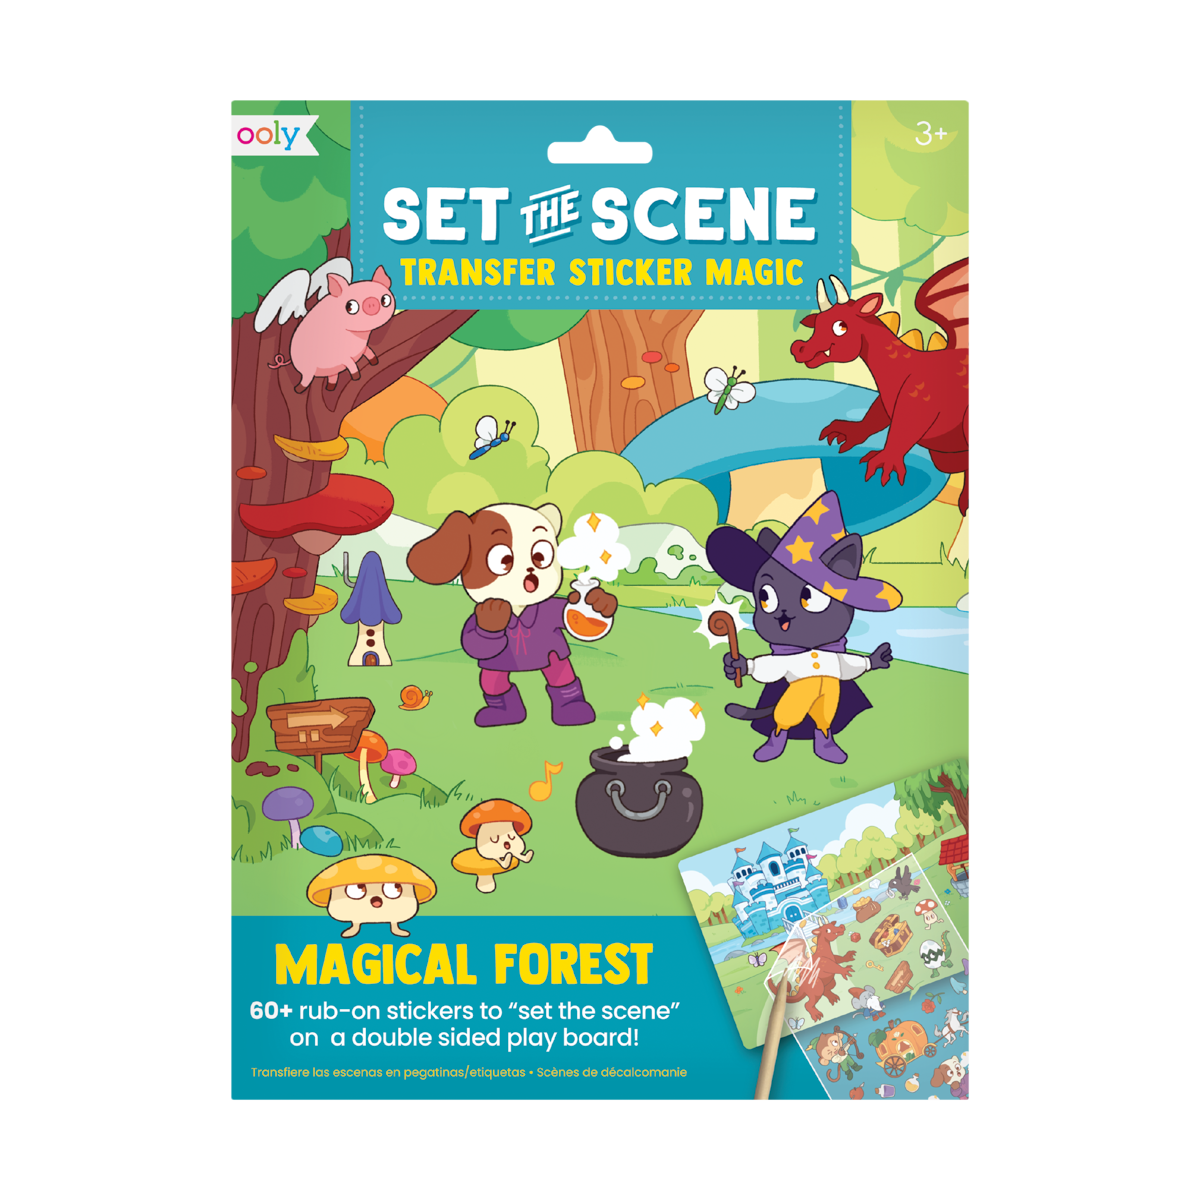 Set The Scene Transfer Stickers Magic - Magical Forest